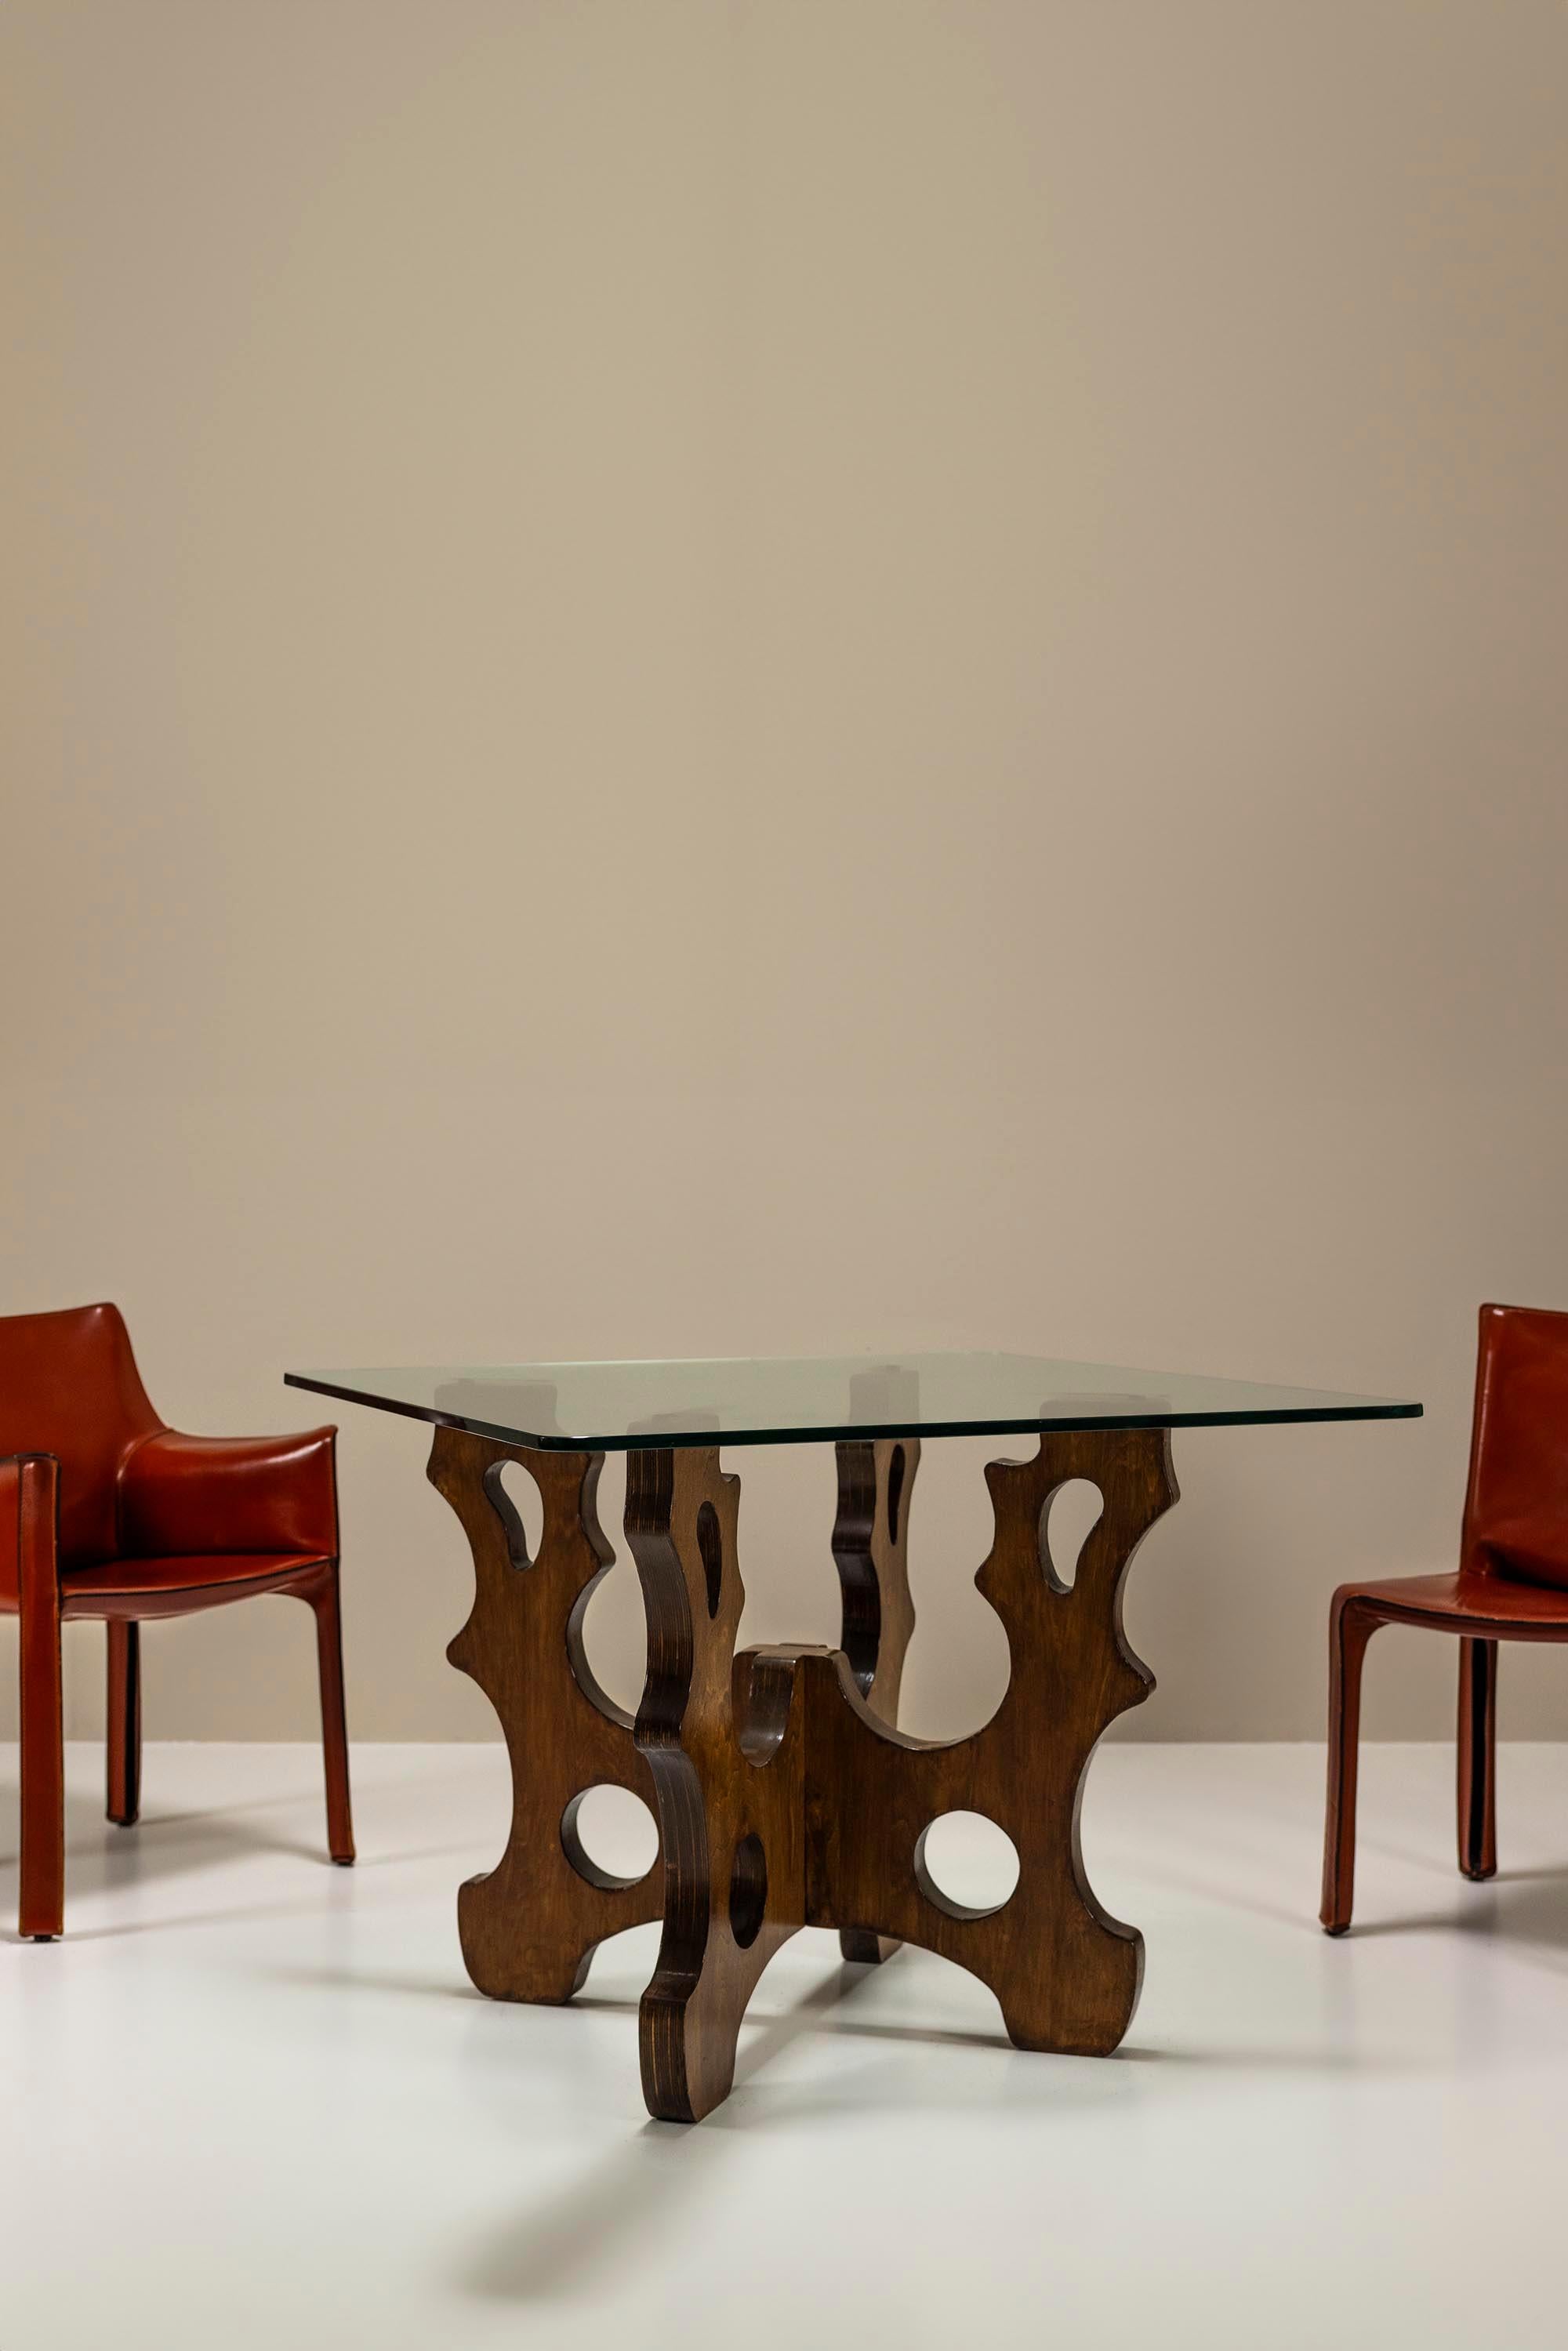 Italian Sculptural Dining Table In Beech And Glass, Italy 1970's For Sale